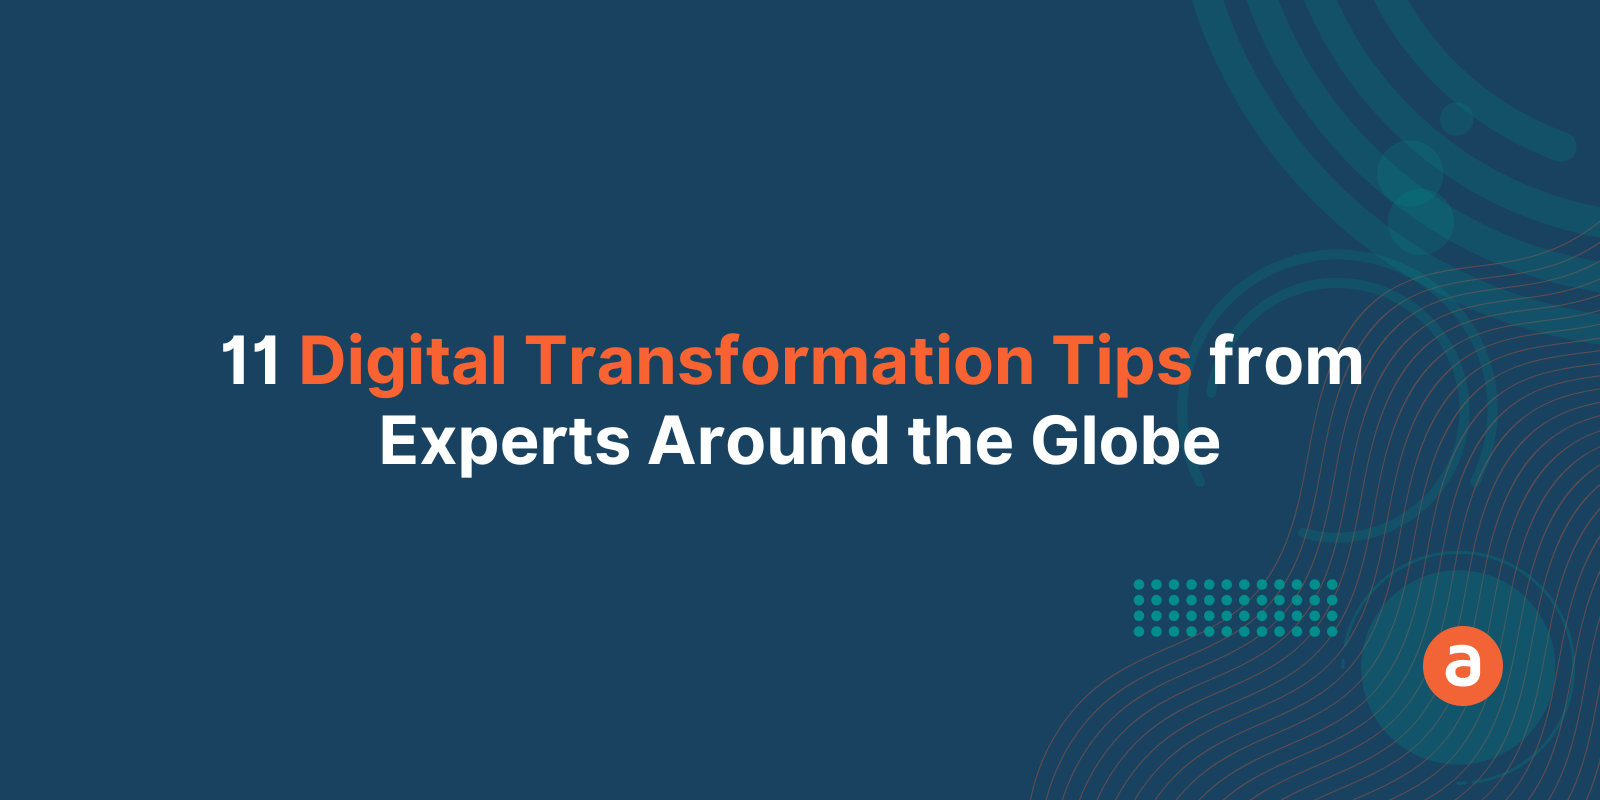 11 Digital Transformation Tips from Experts Around the Globe